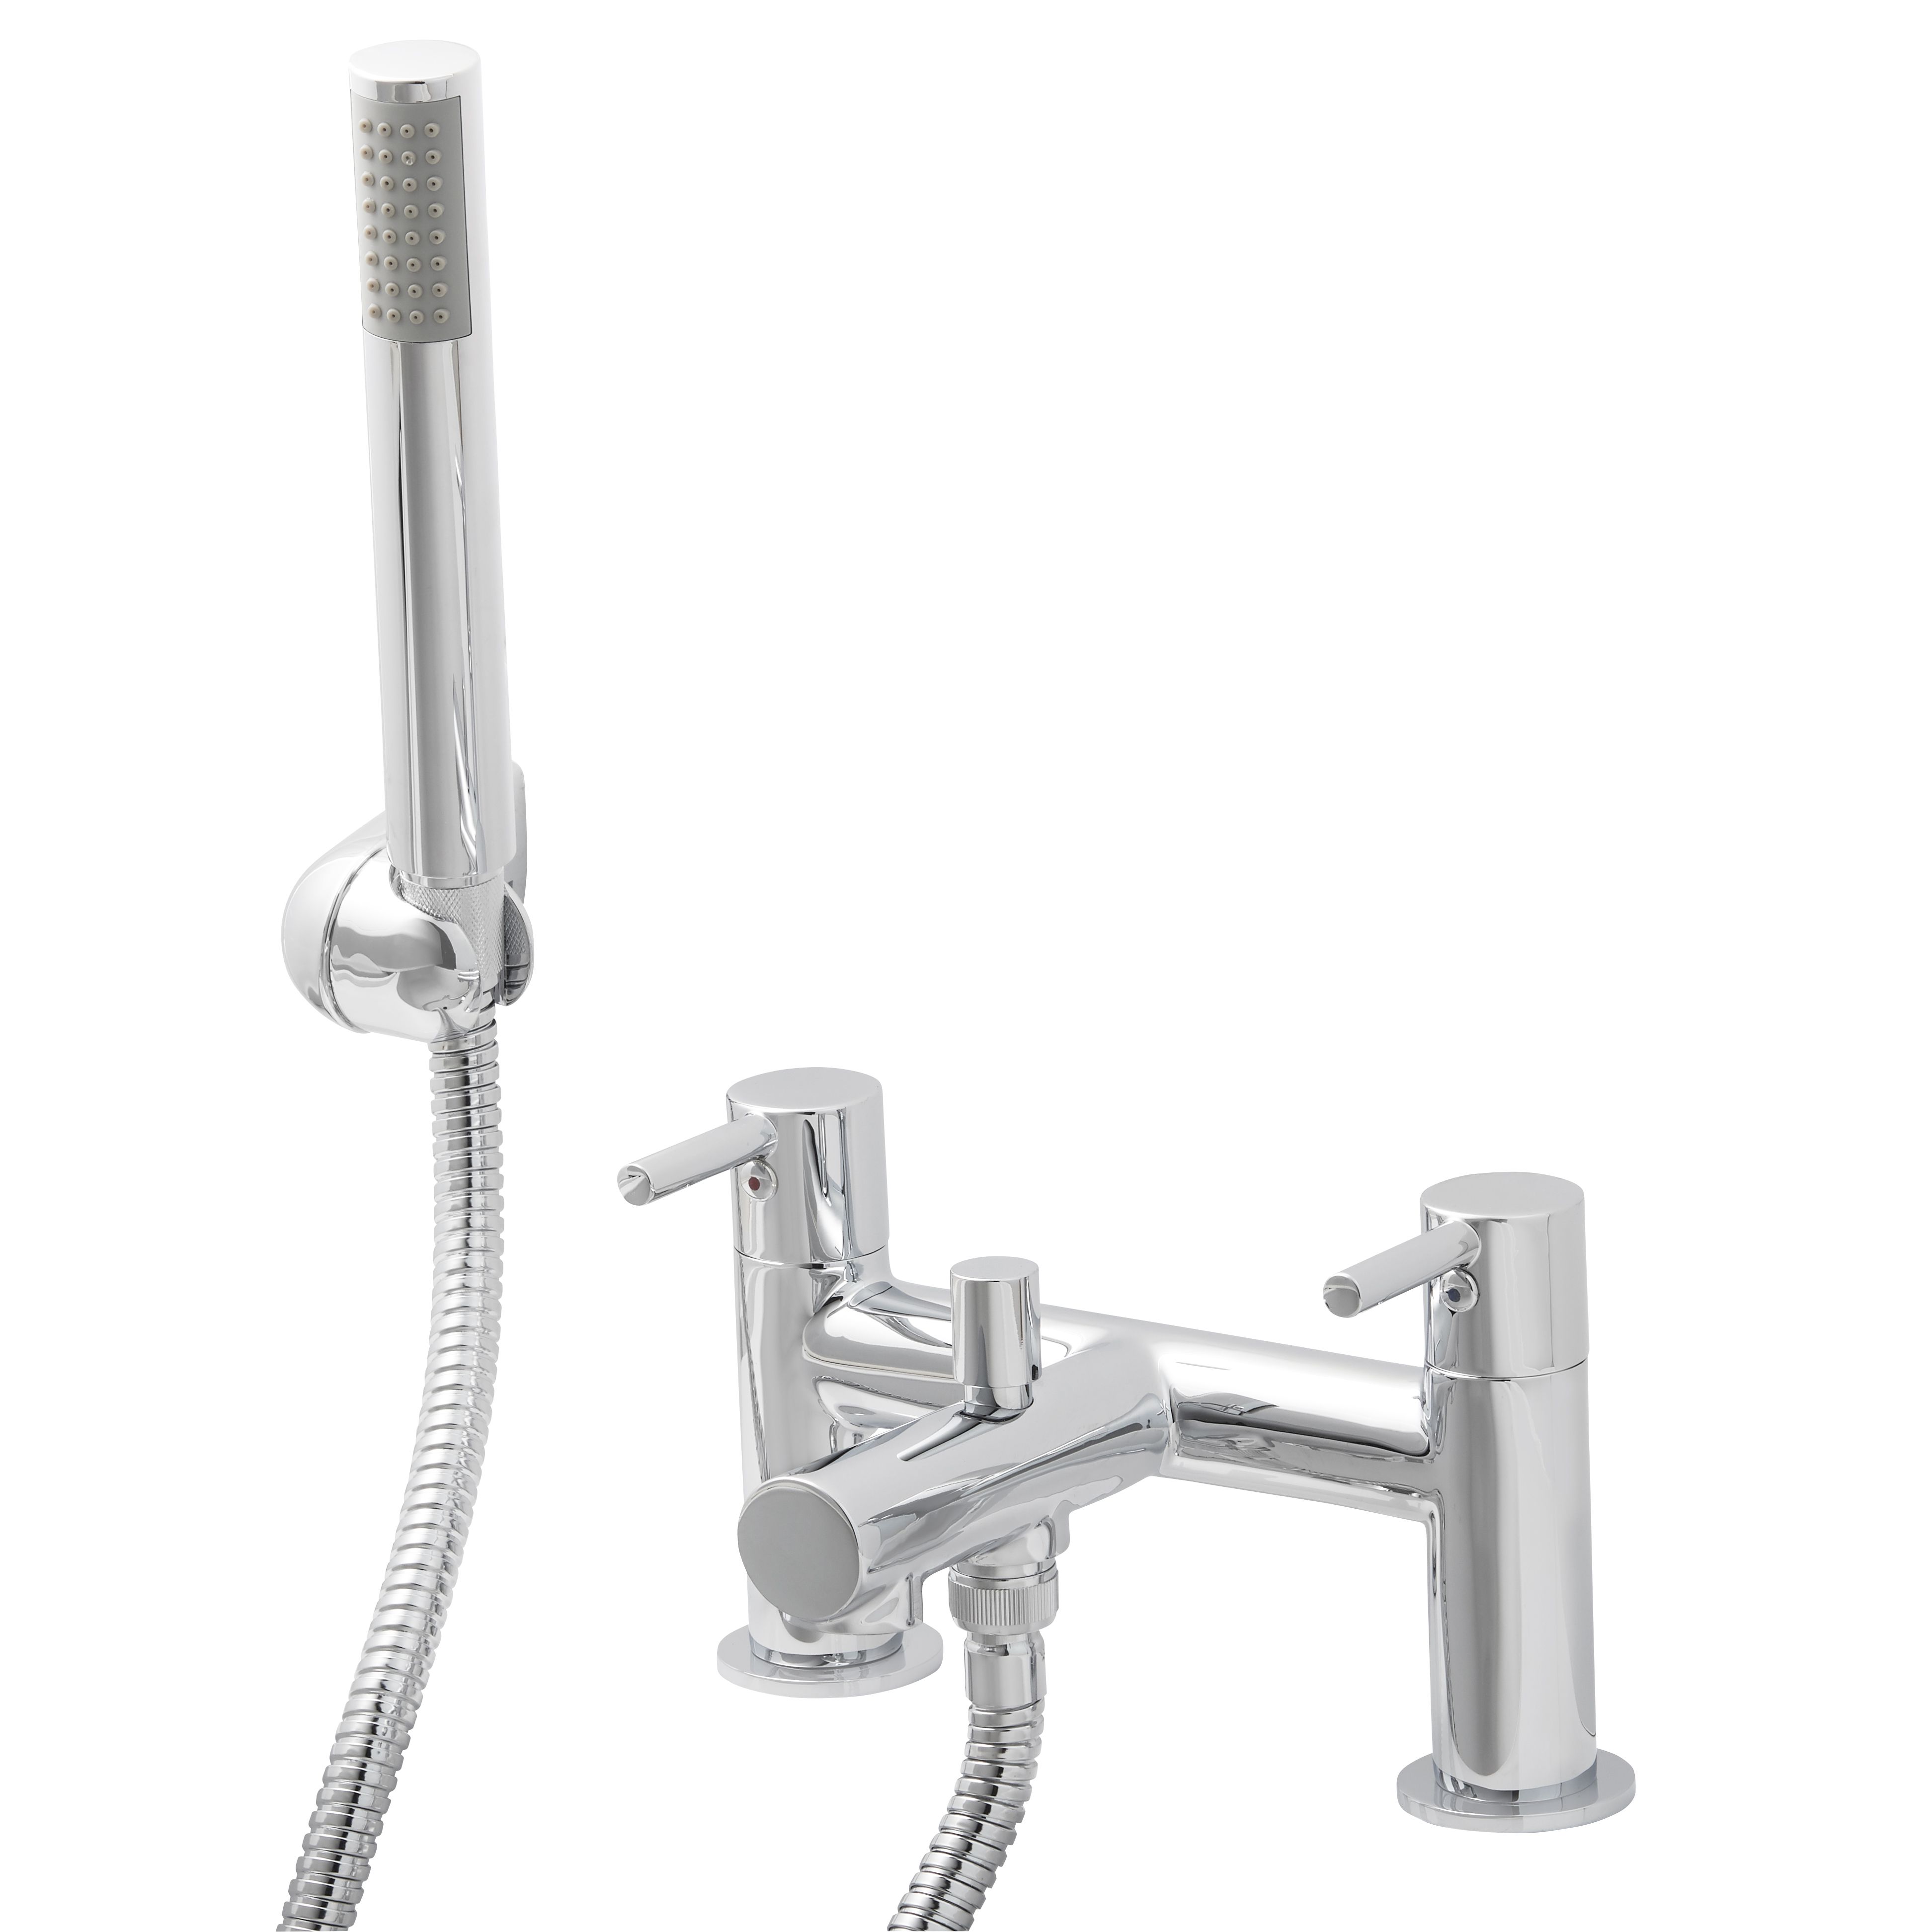 GoodHome Lazu Combi boiler, gravity-fed & mains pressure water systems Ceramic Shower mixer Tap